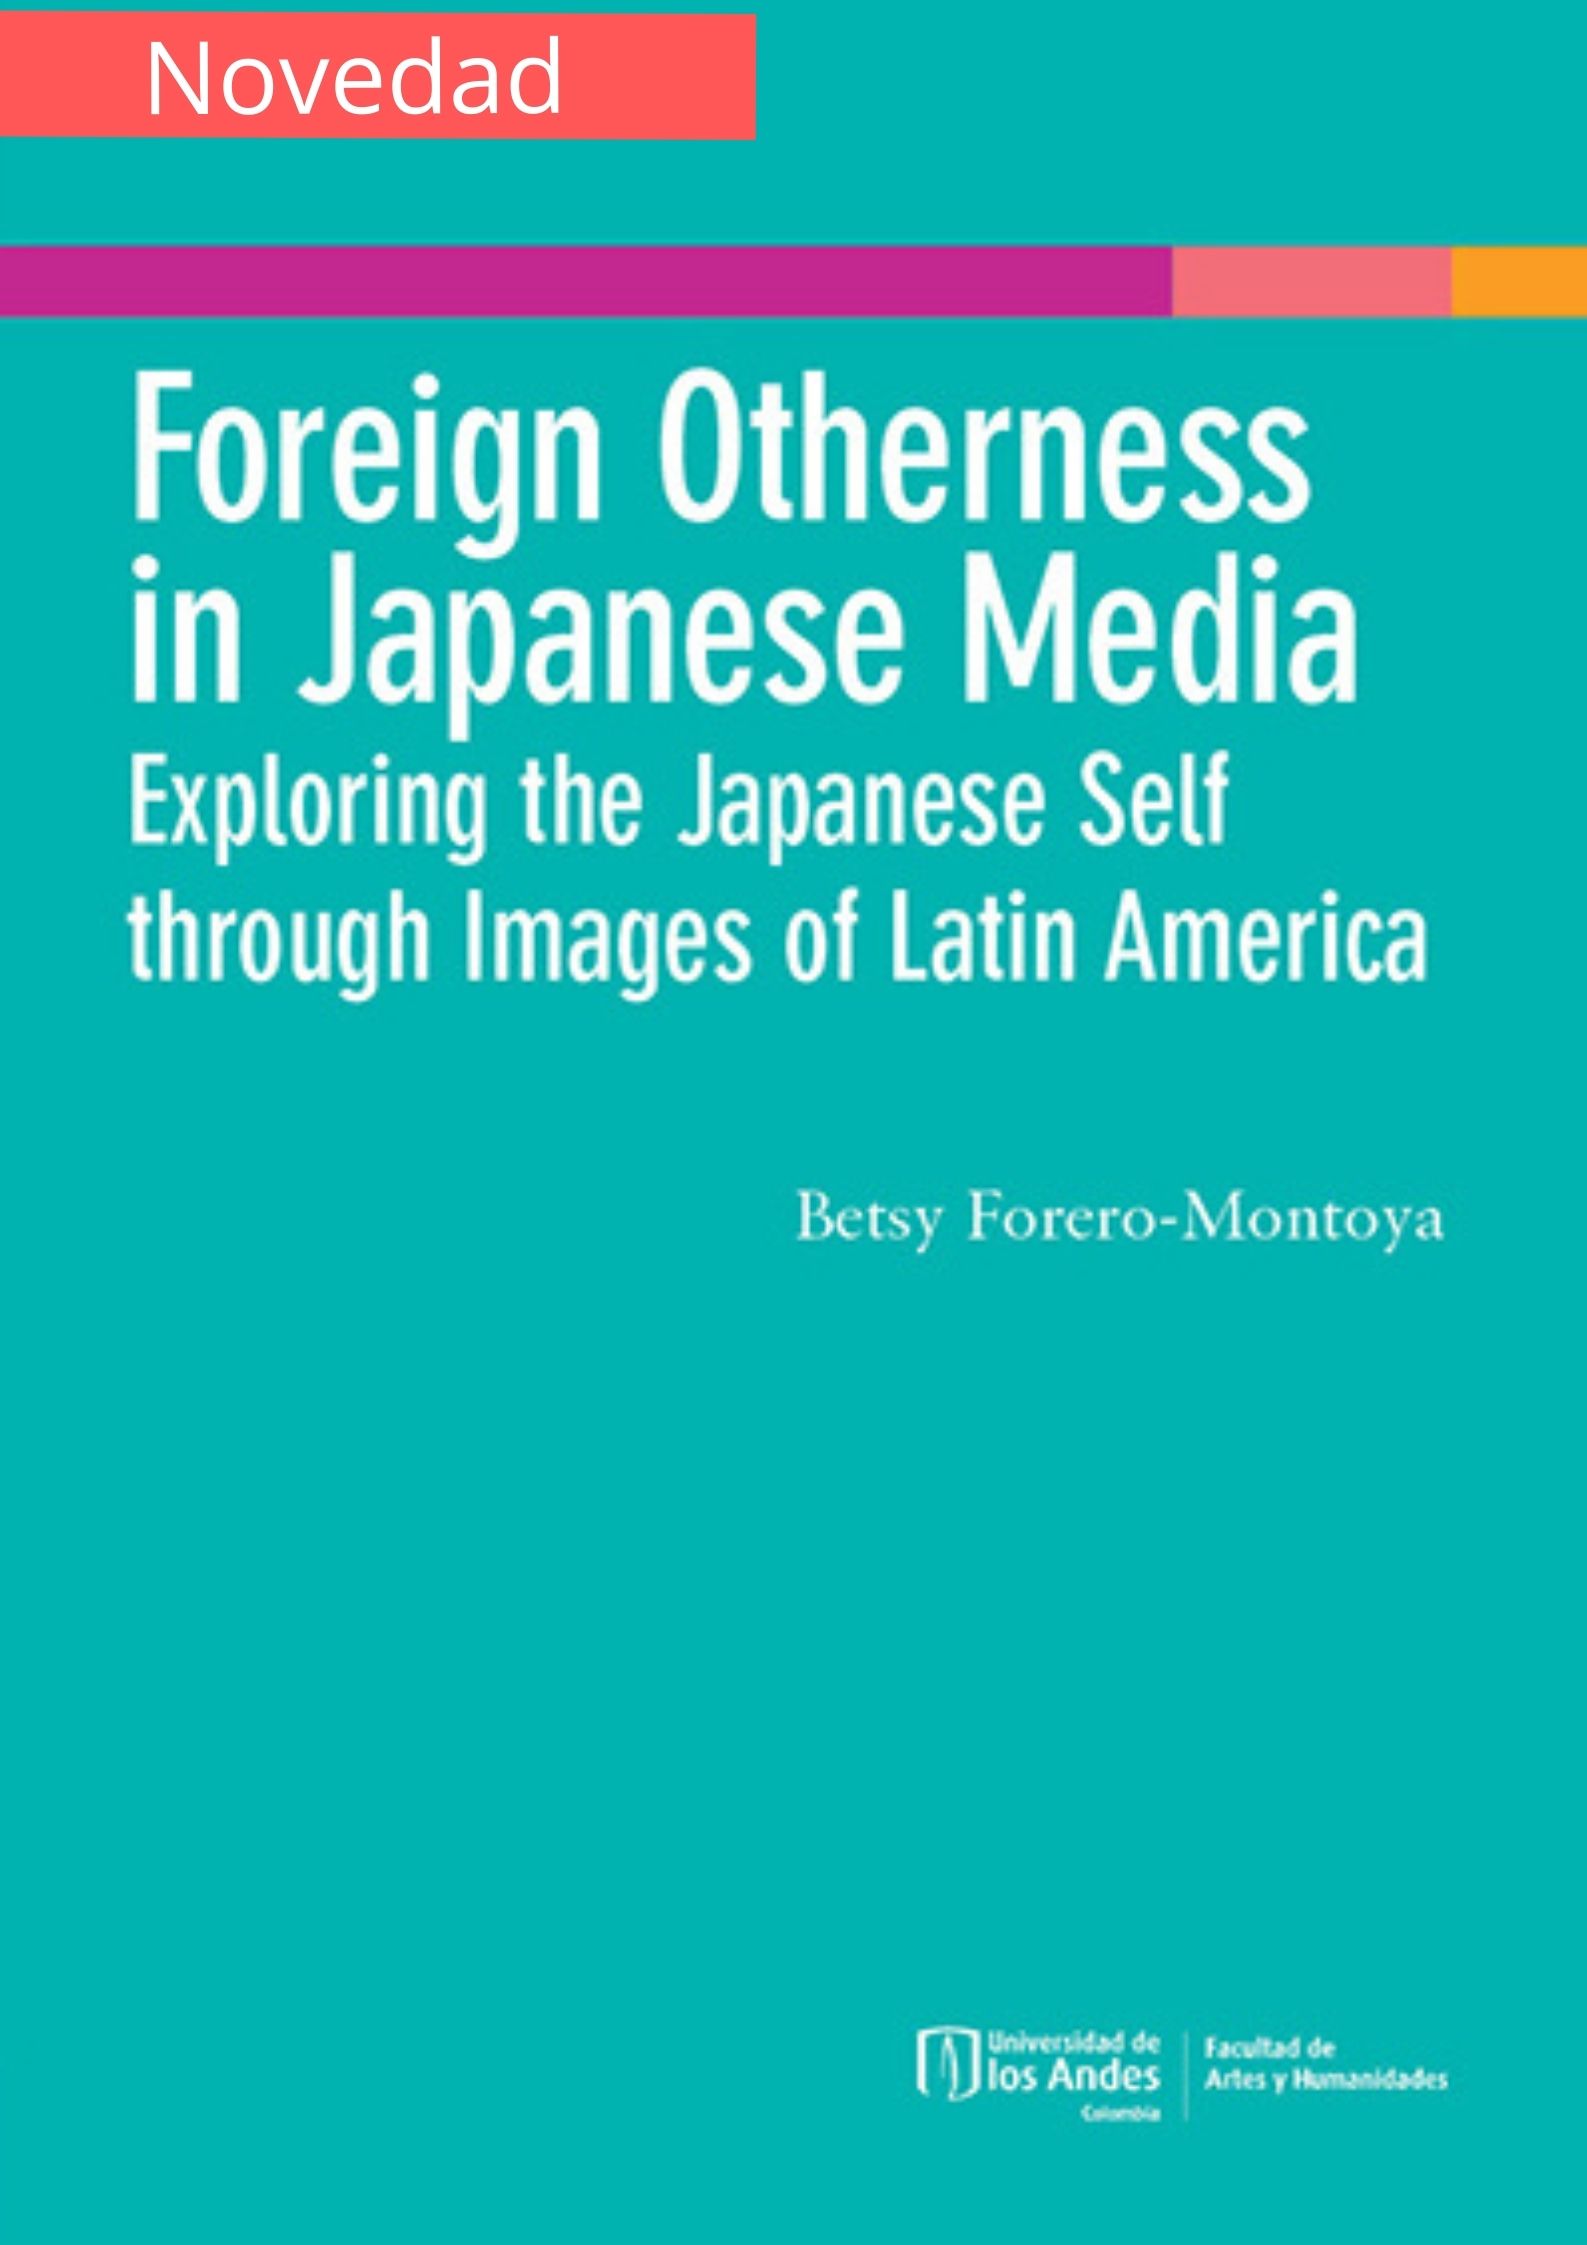 Foreign Otherness in Japanese Media. Exploring the Japanese self through the images of Latin America